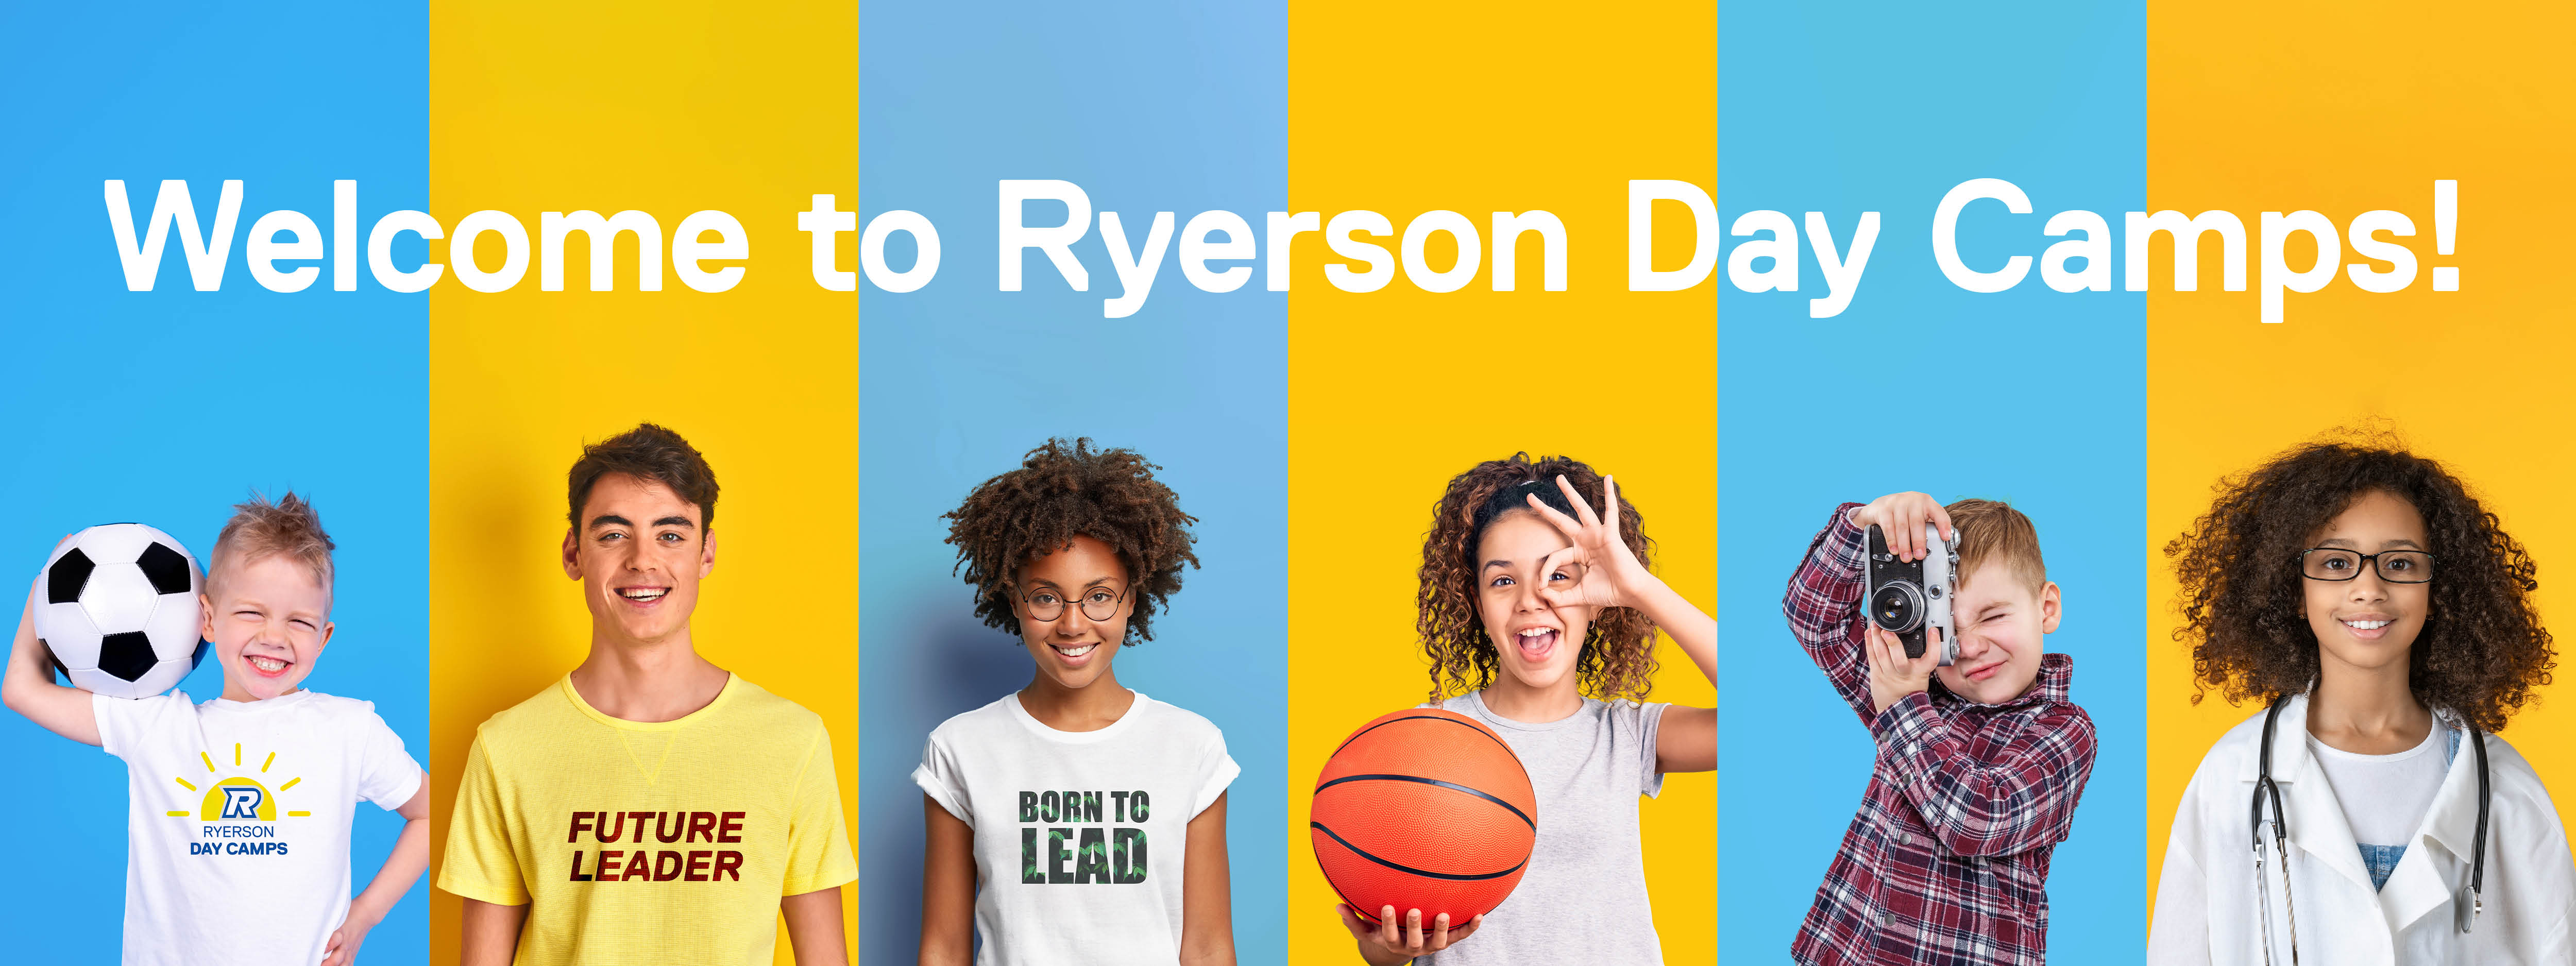 Six portraits of campers posing with an array of props are compiled side-by-side under the words "Welcome to Ryerson Day Camps!"